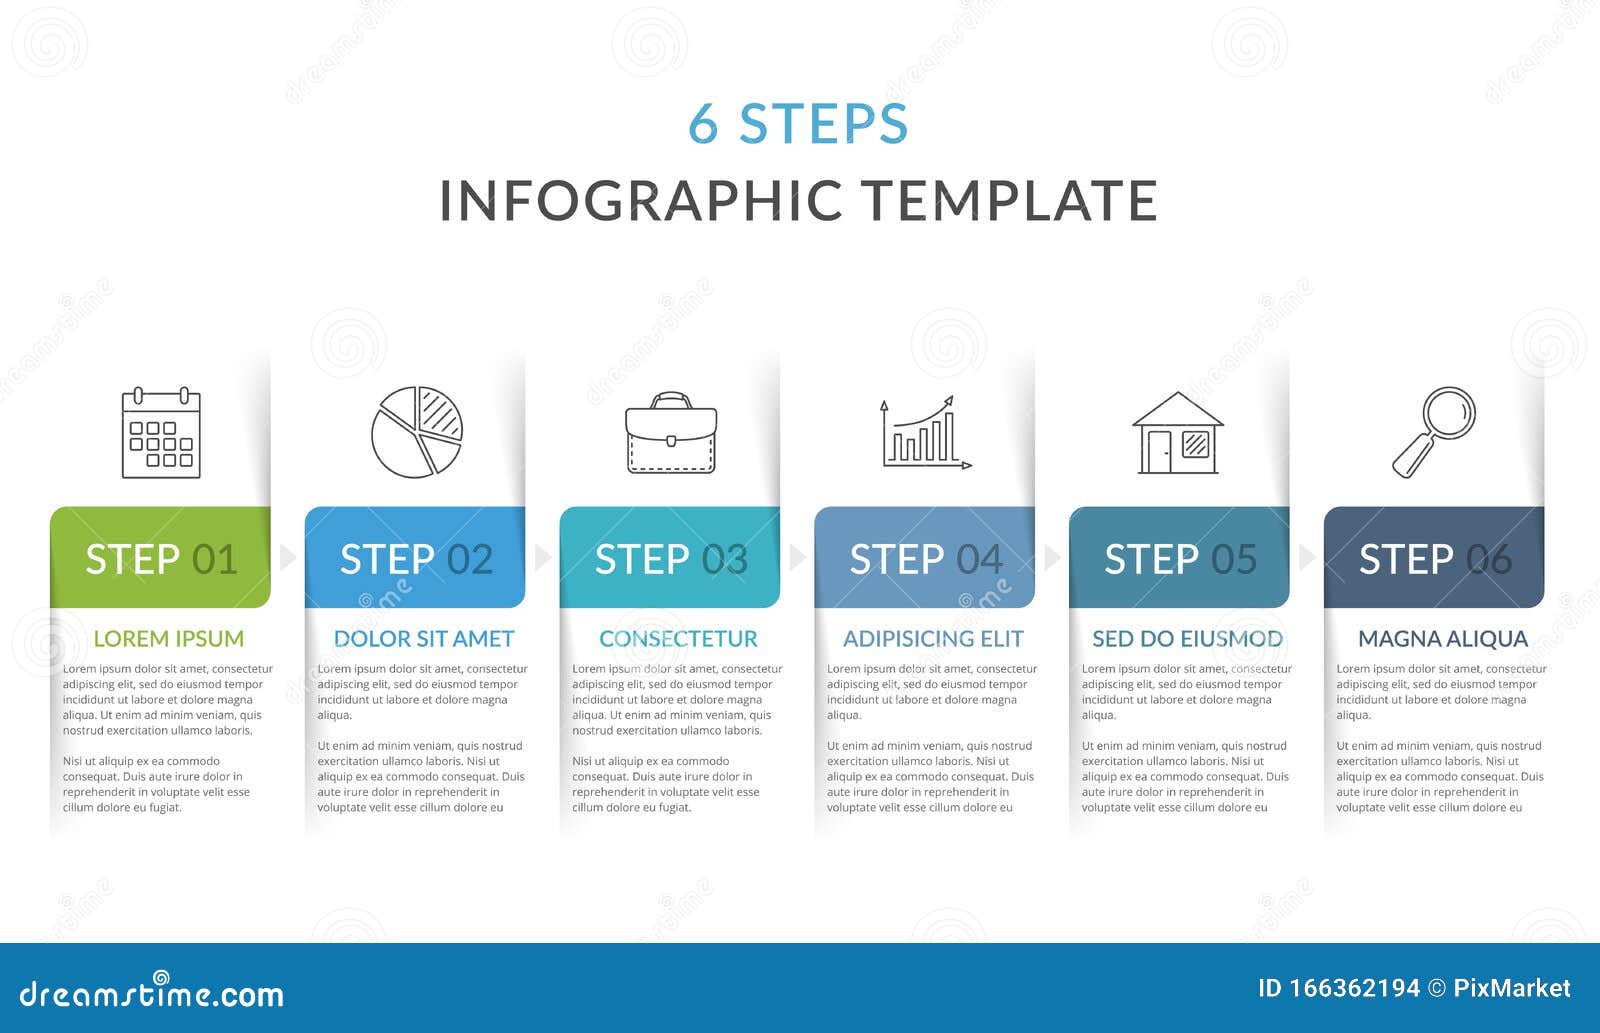 infographic template with 6 steps